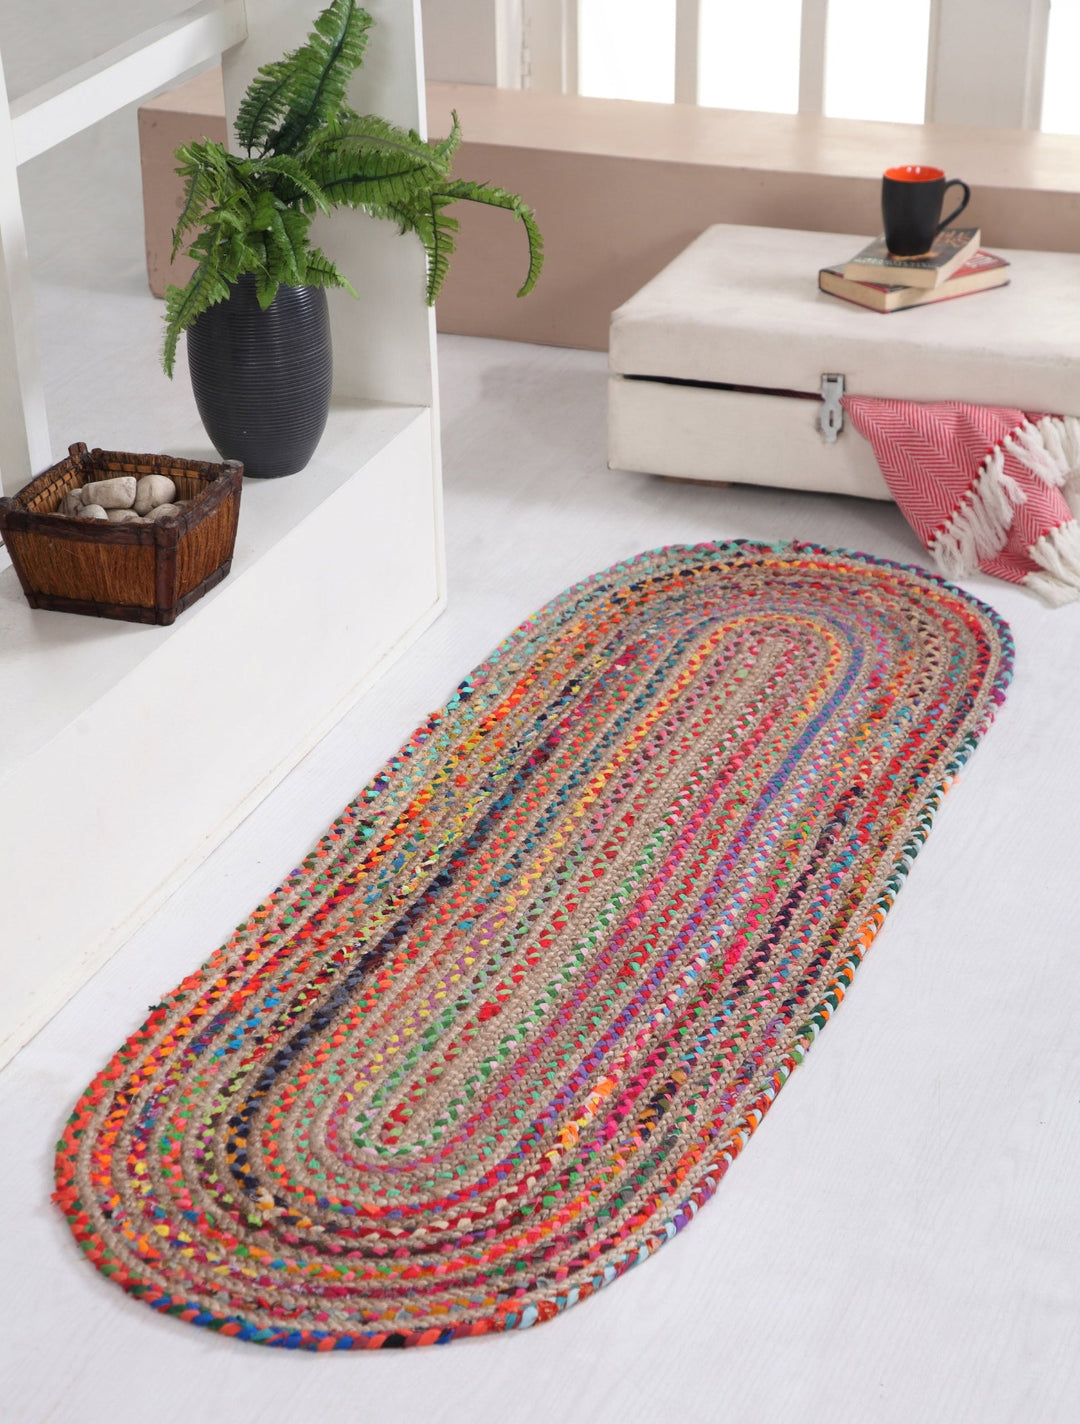 Mishran Long Oval Runner Rug Braided Jute Fabric Lifestyle Second Nature Online